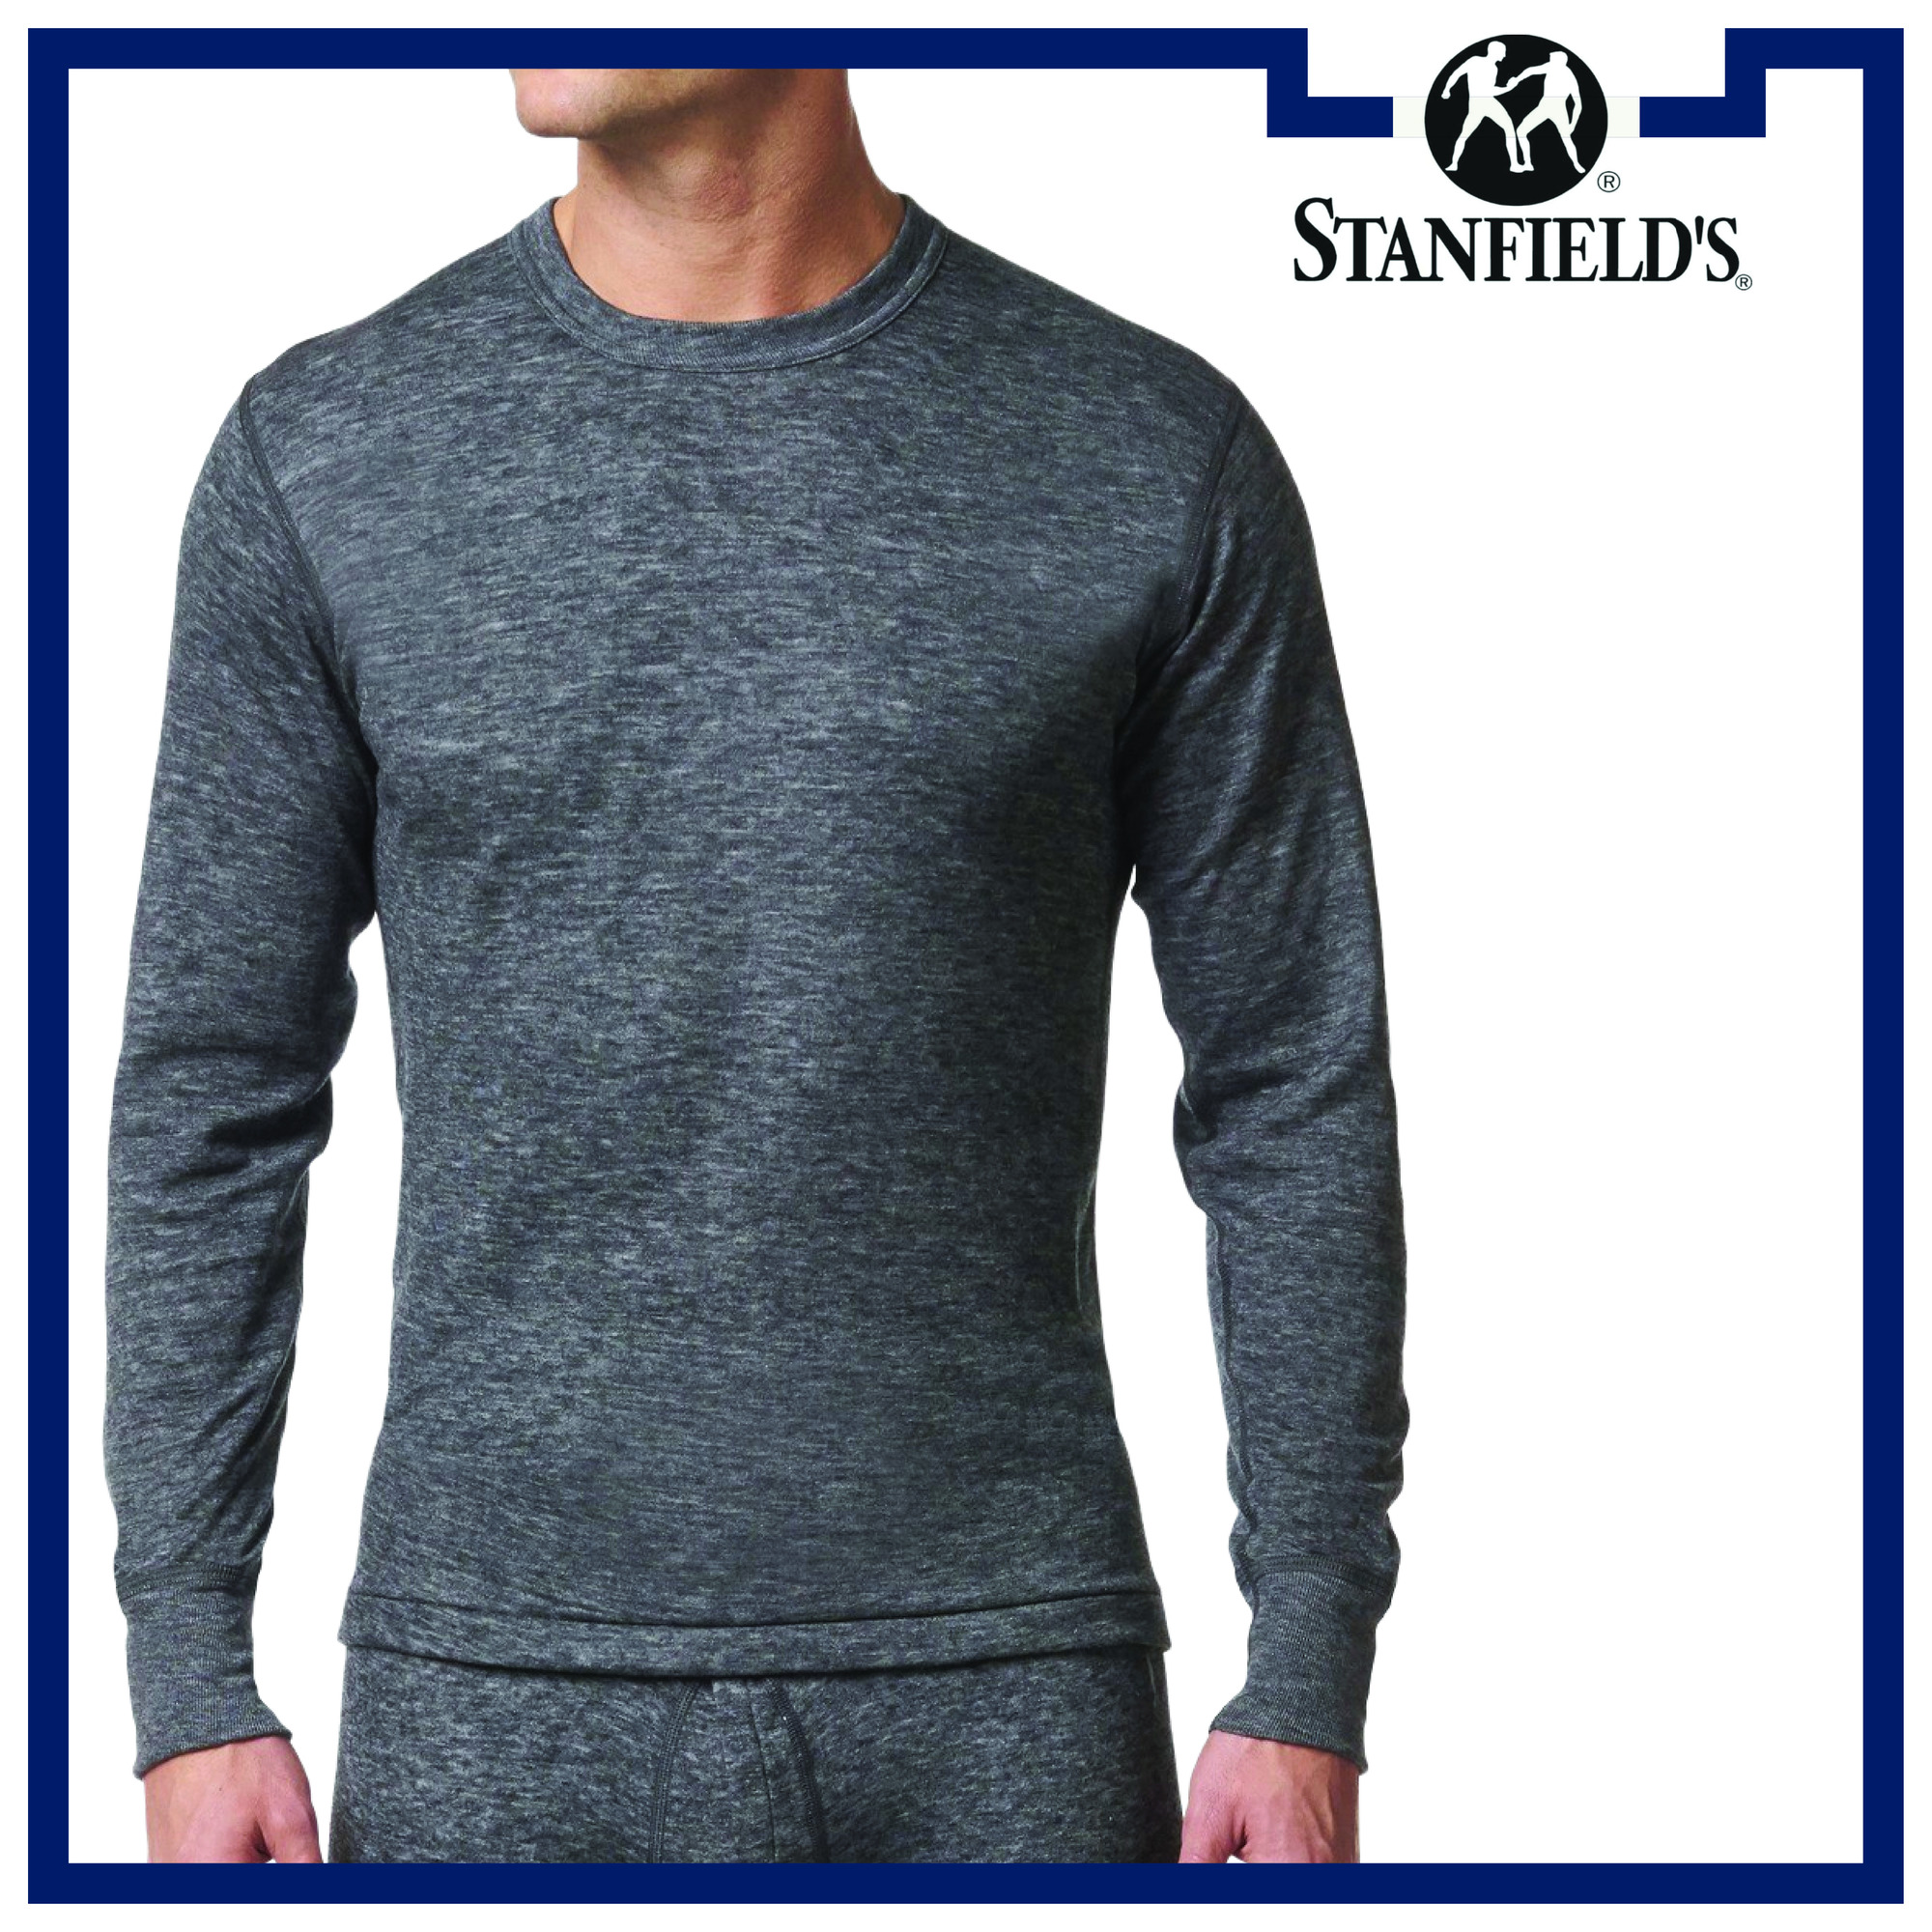  Stanfield's Men's Merino Wool Two Layer Long Sleeve Top,  Charcoal Mix, Small : Clothing, Shoes & Jewelry